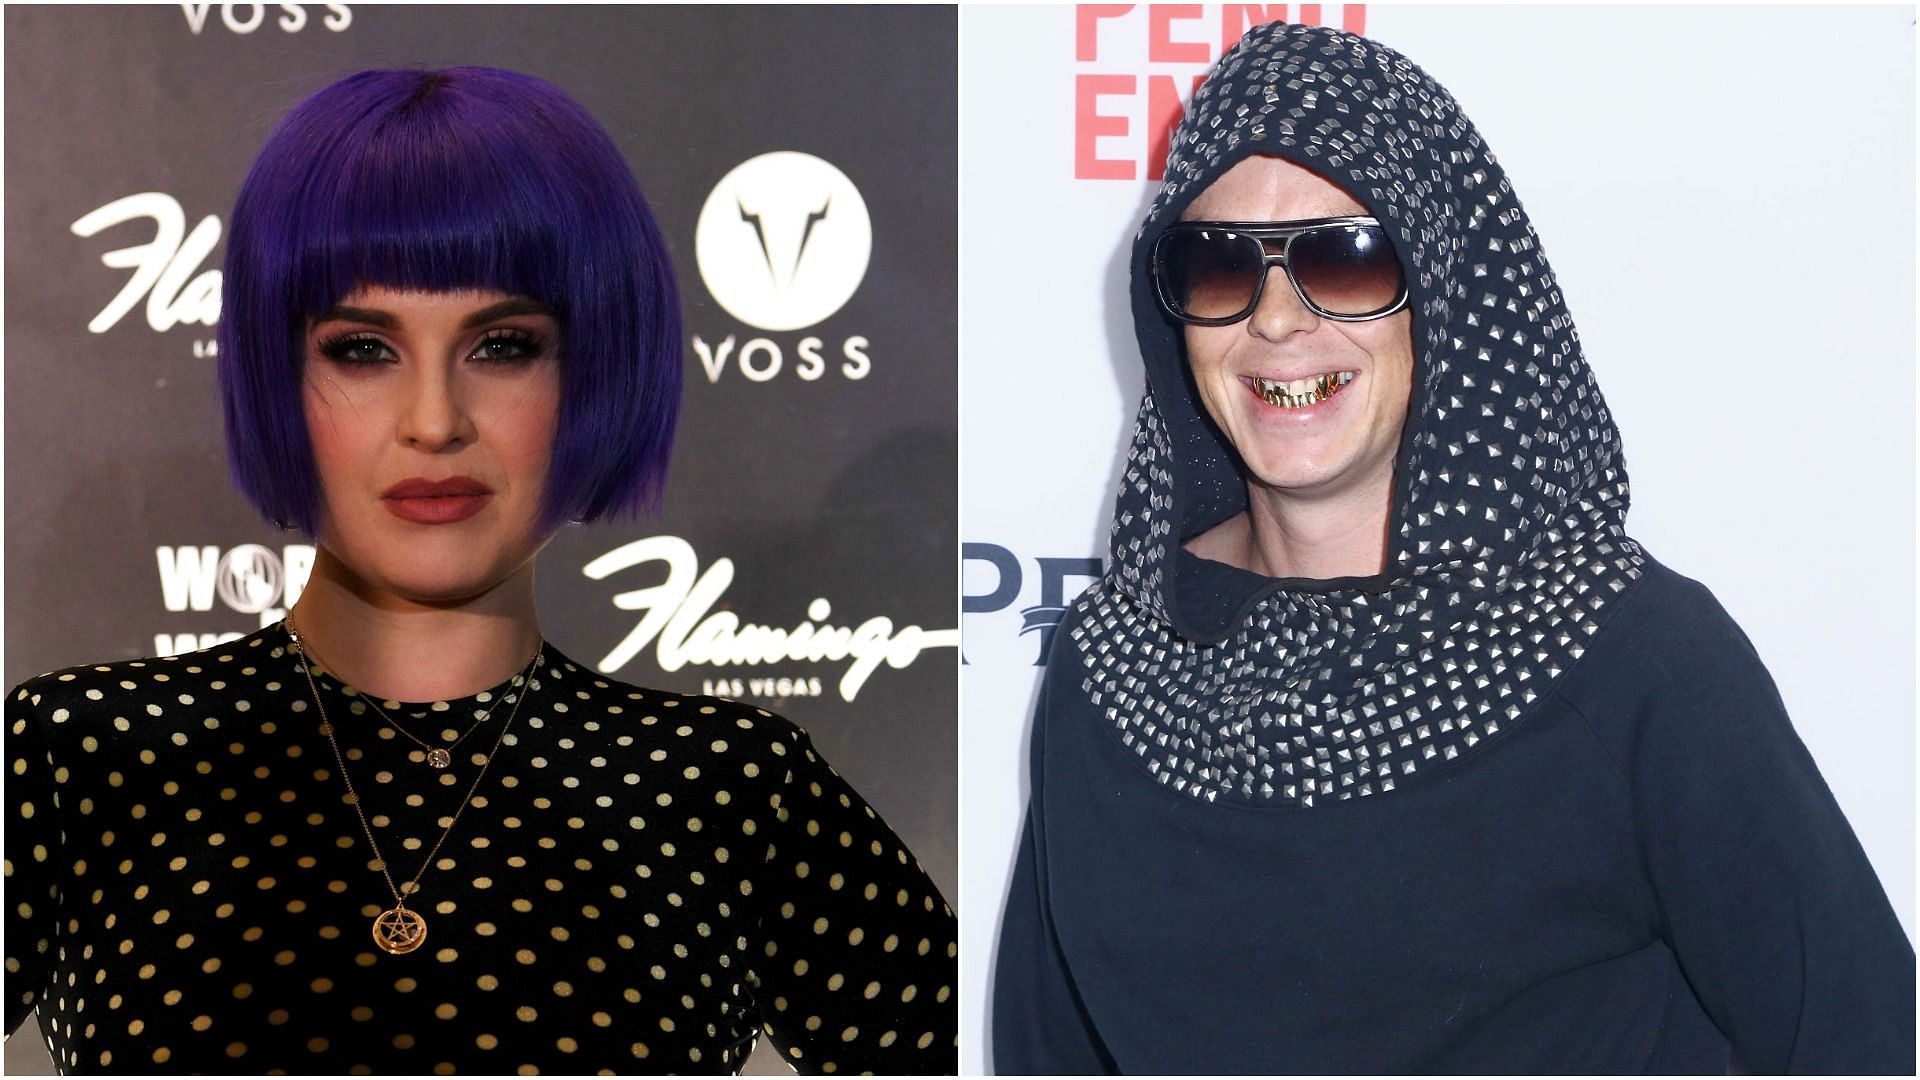 Kelly Osbourne and Sid Wilson are reportedly dating each other (Images via Denise Truscello and Justin Baker/Getty Images)